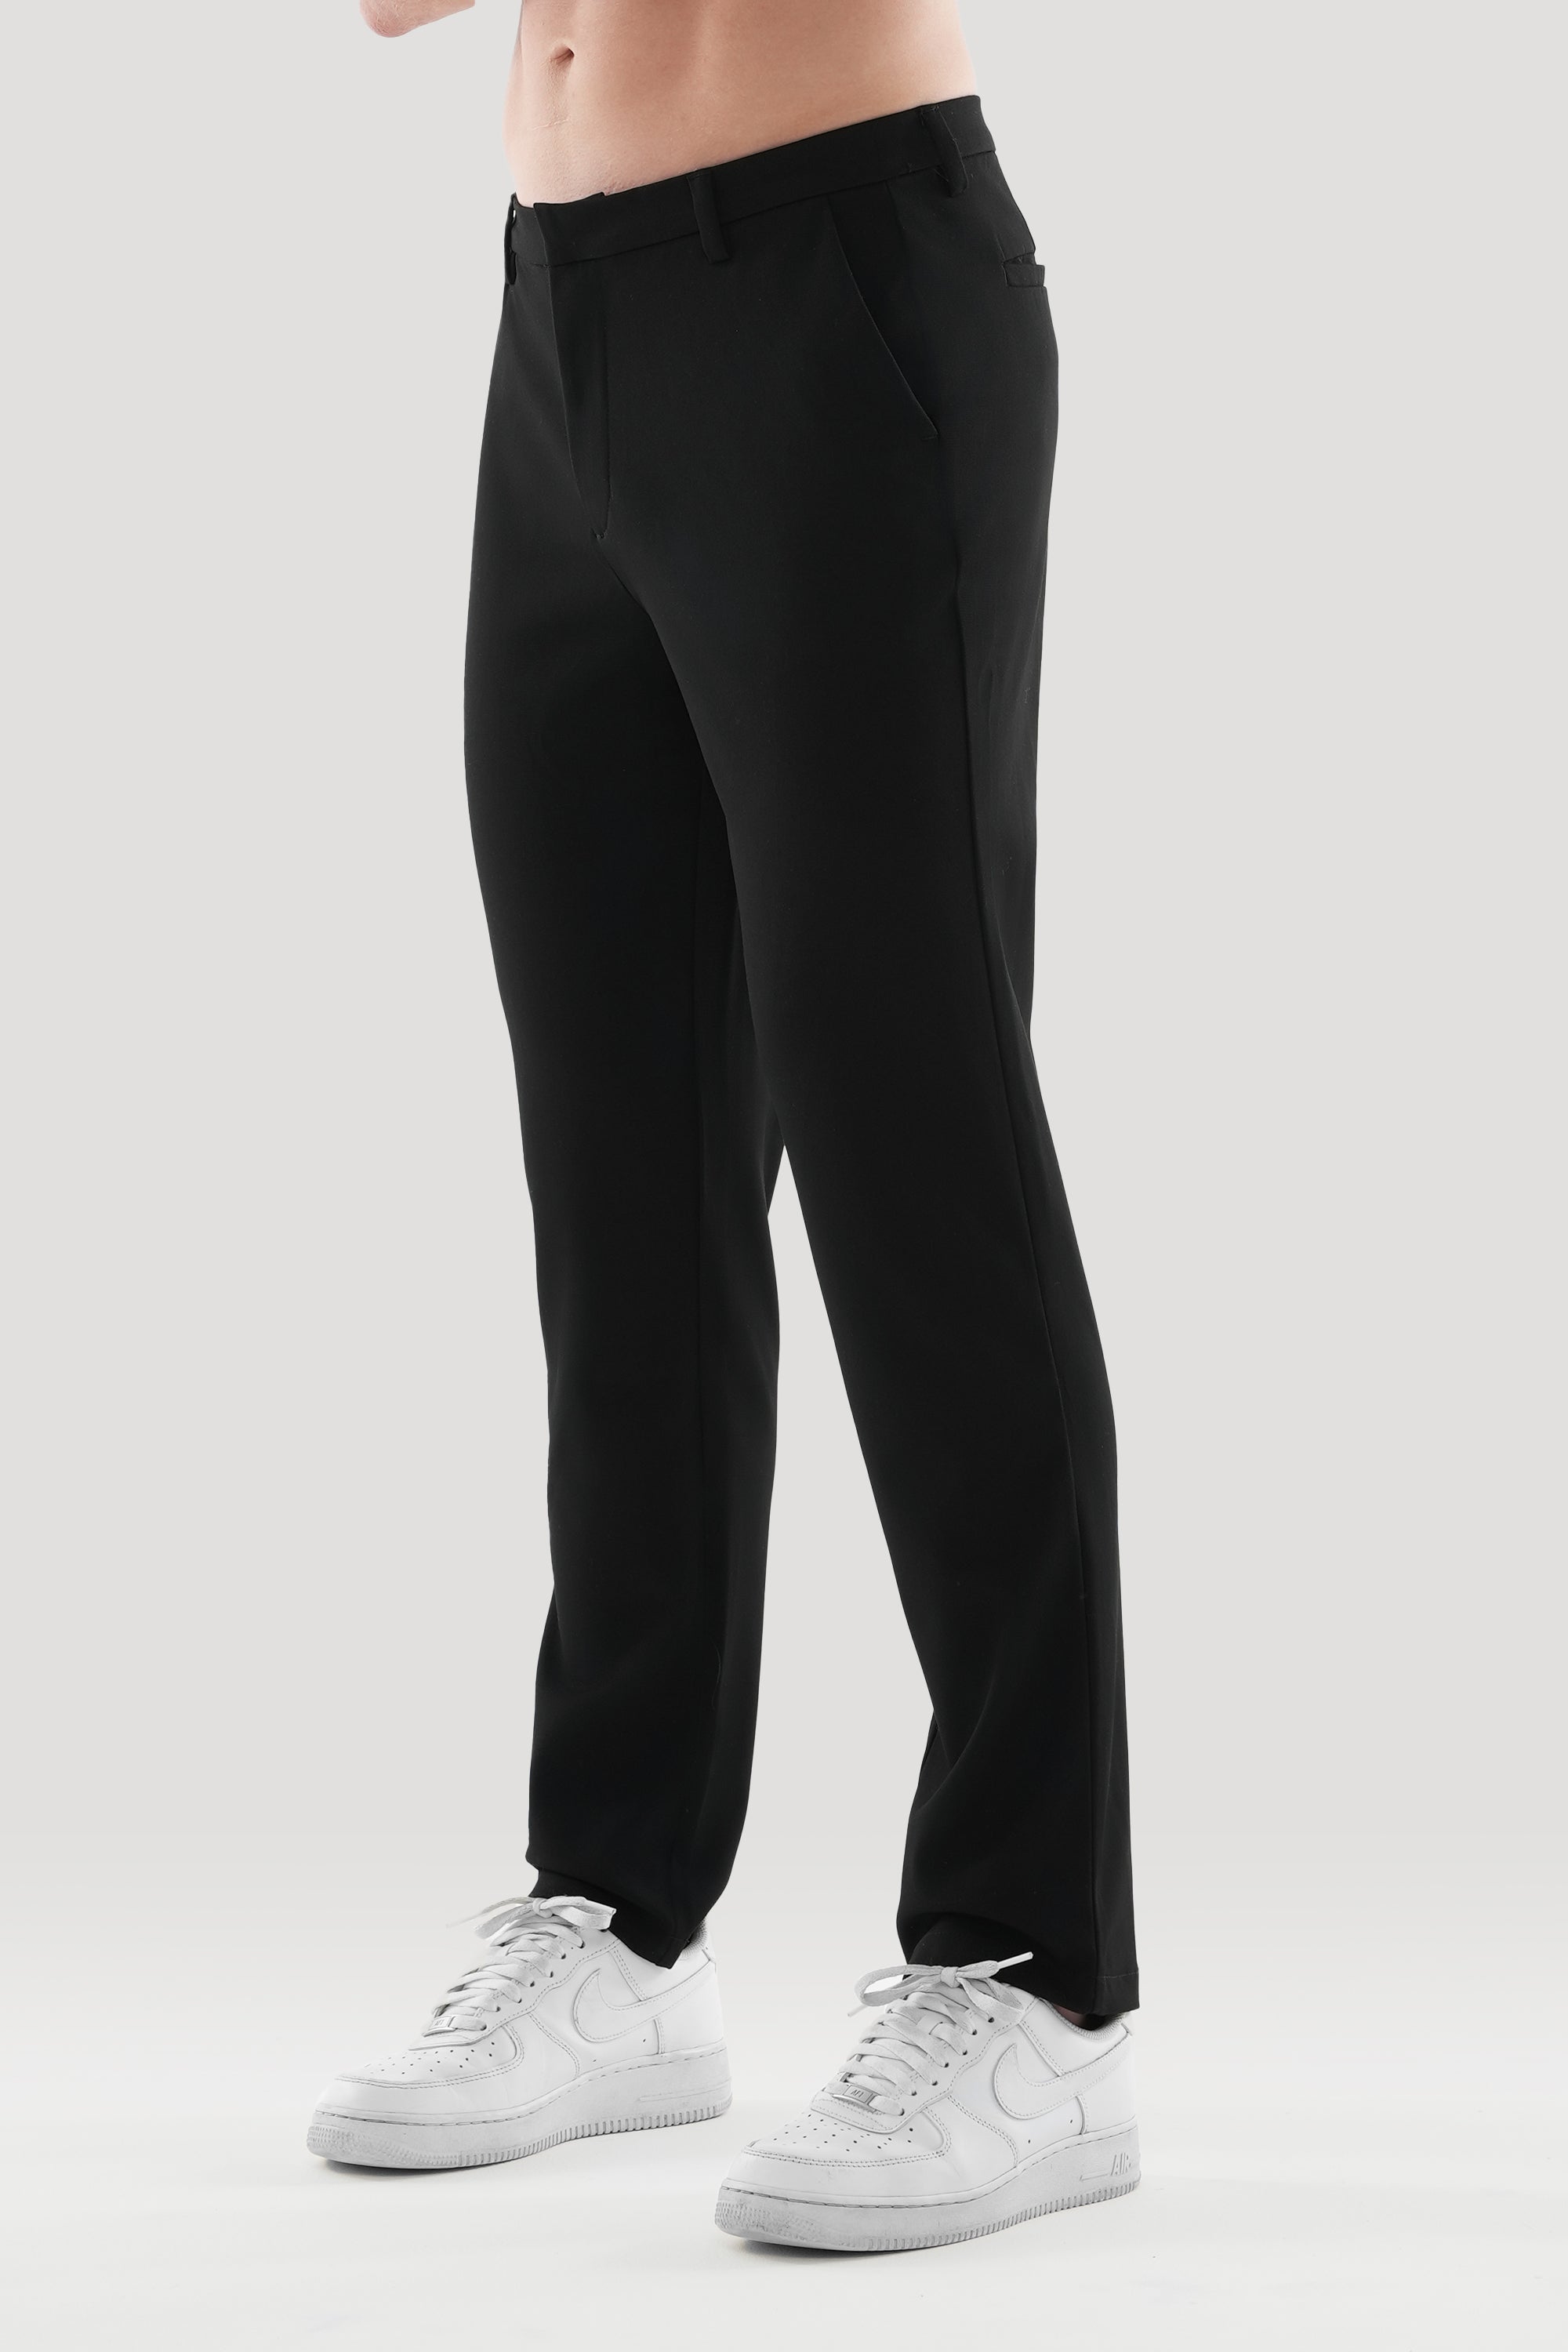 THE LUCIA TROUSERS - BLACK